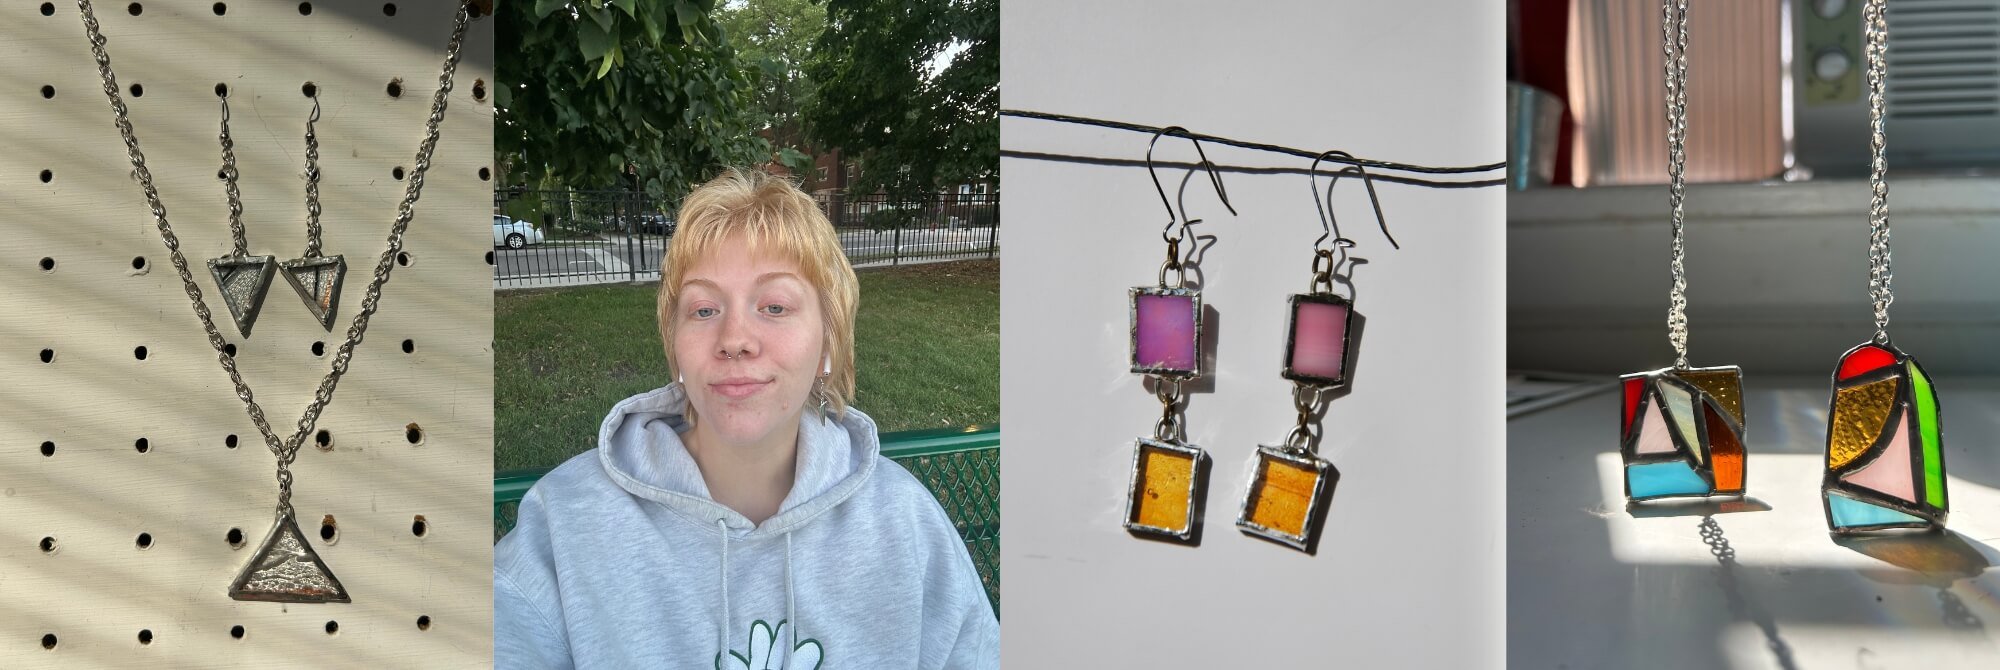 Stained Glass Jewelry Workshop - October 7